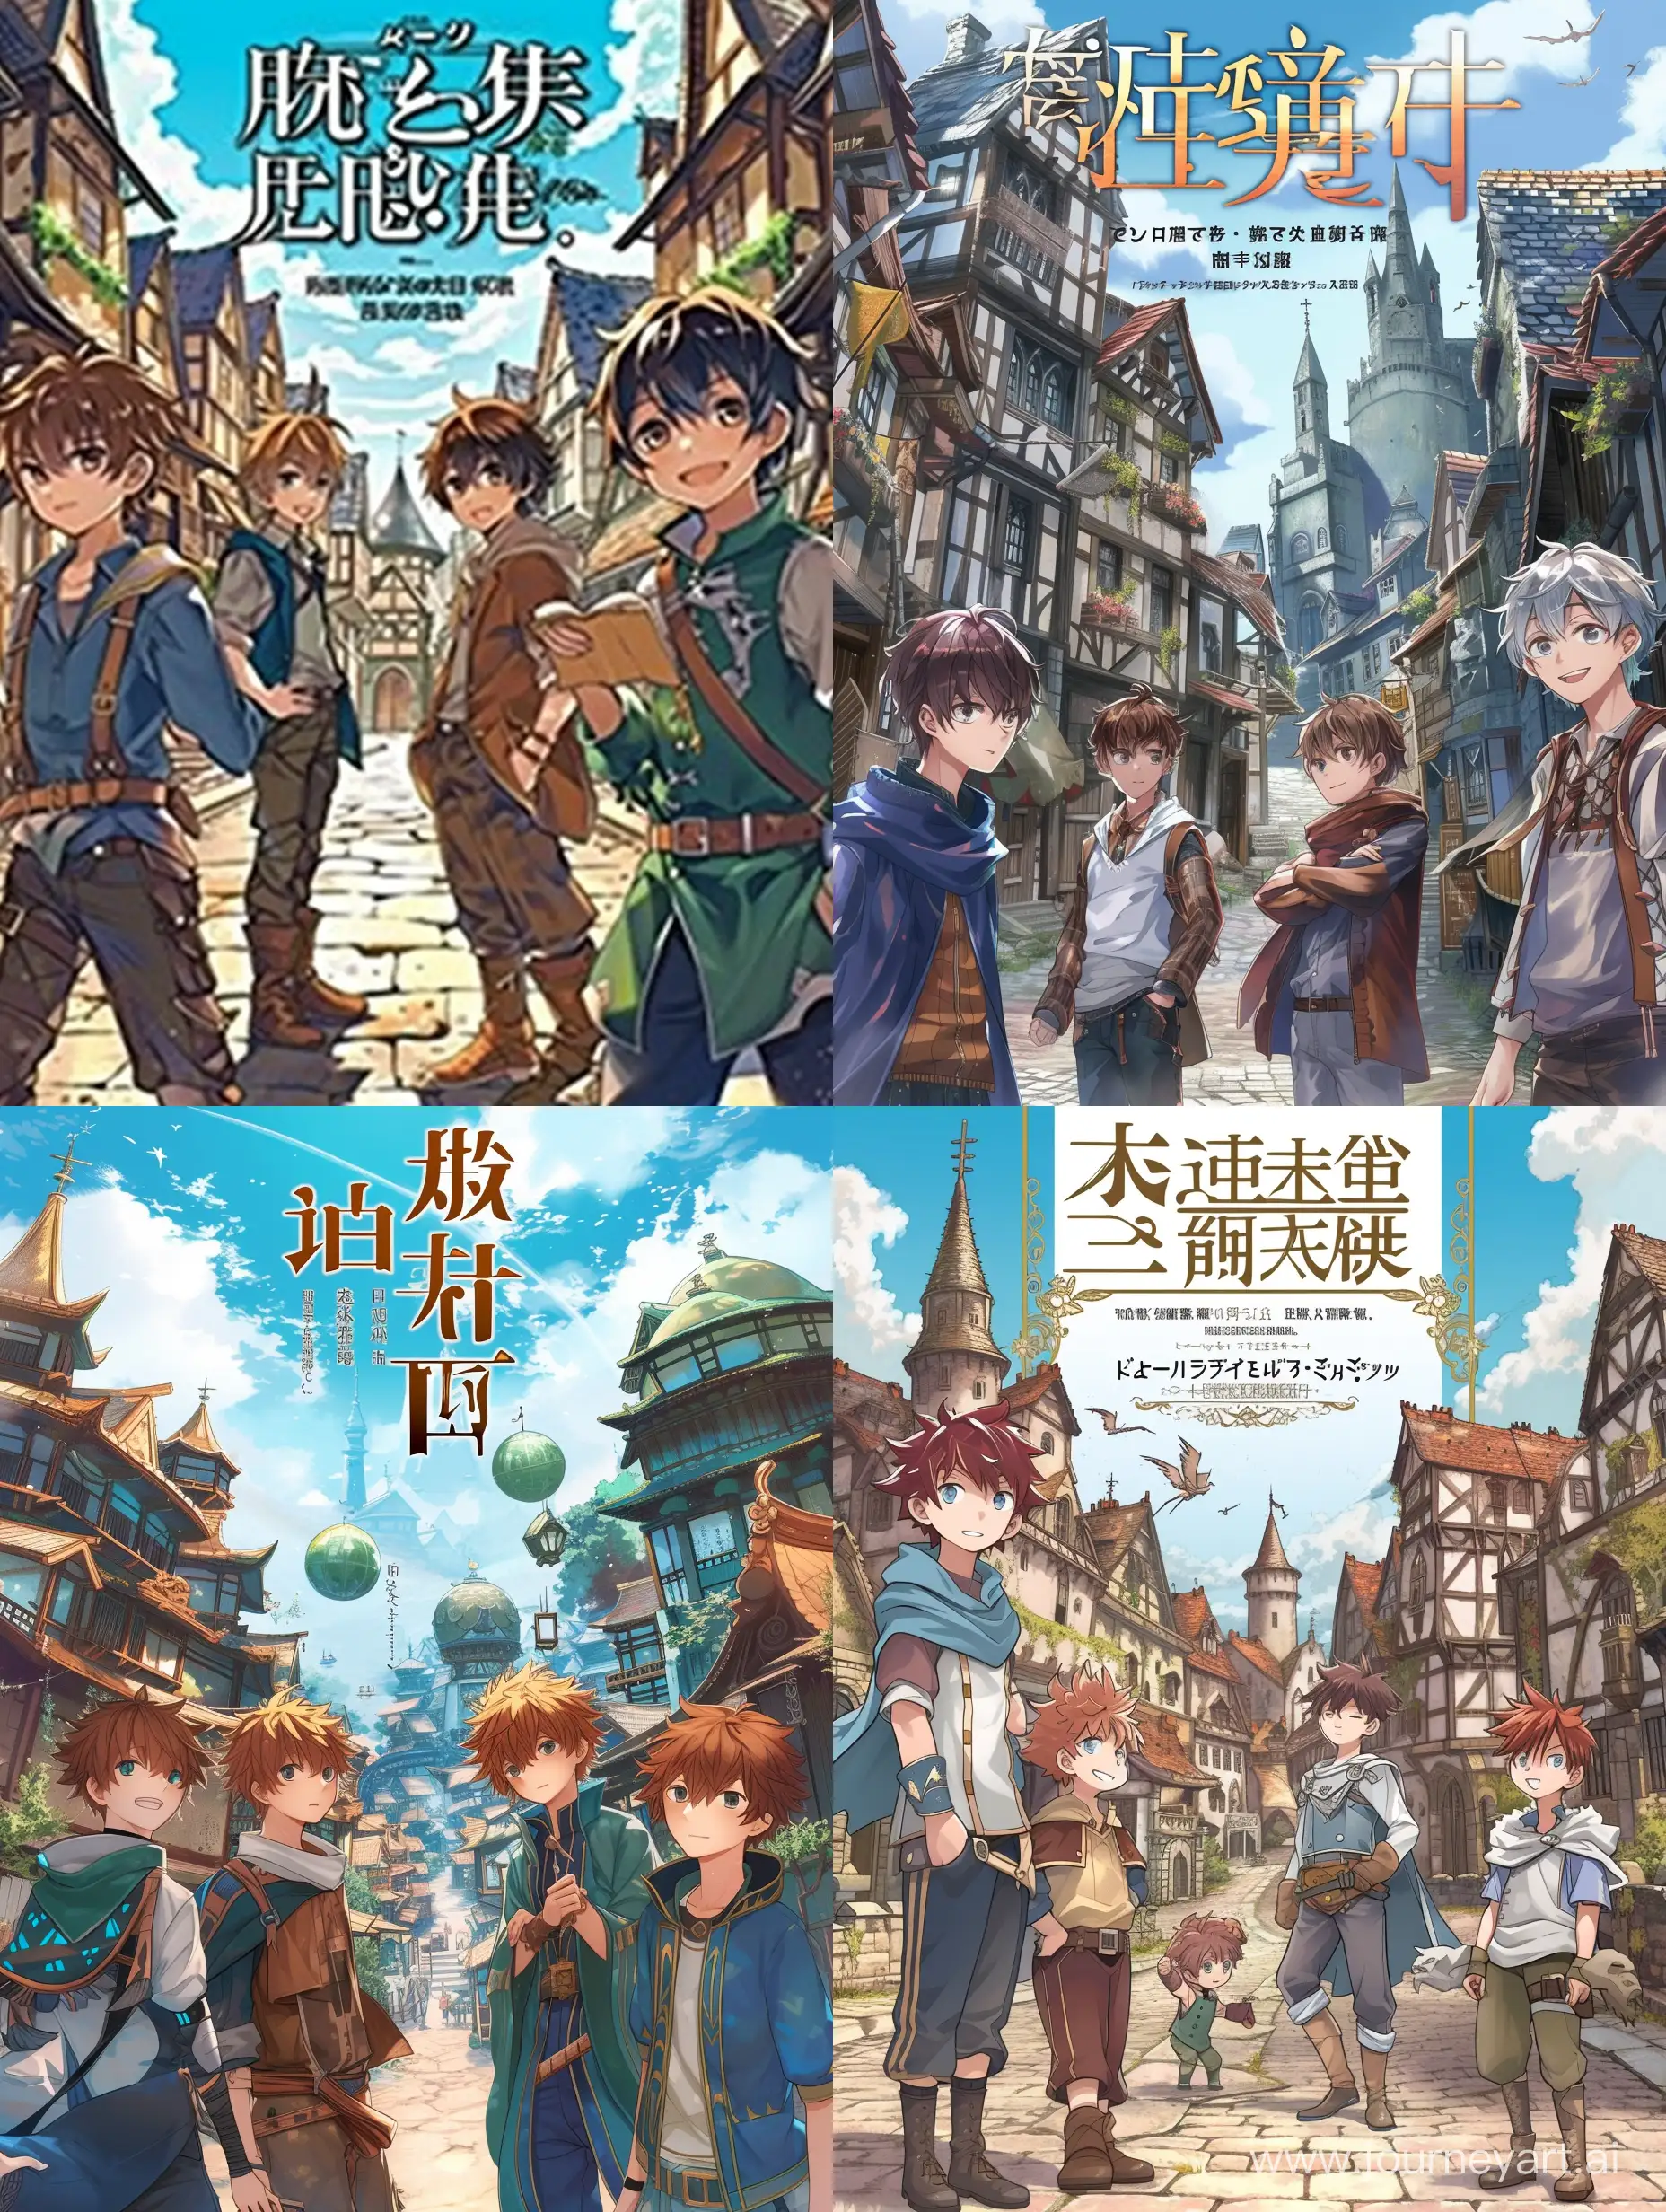 The cover for light novel, four boys and fantasy world with buildings, genres: fantasy and isekai.